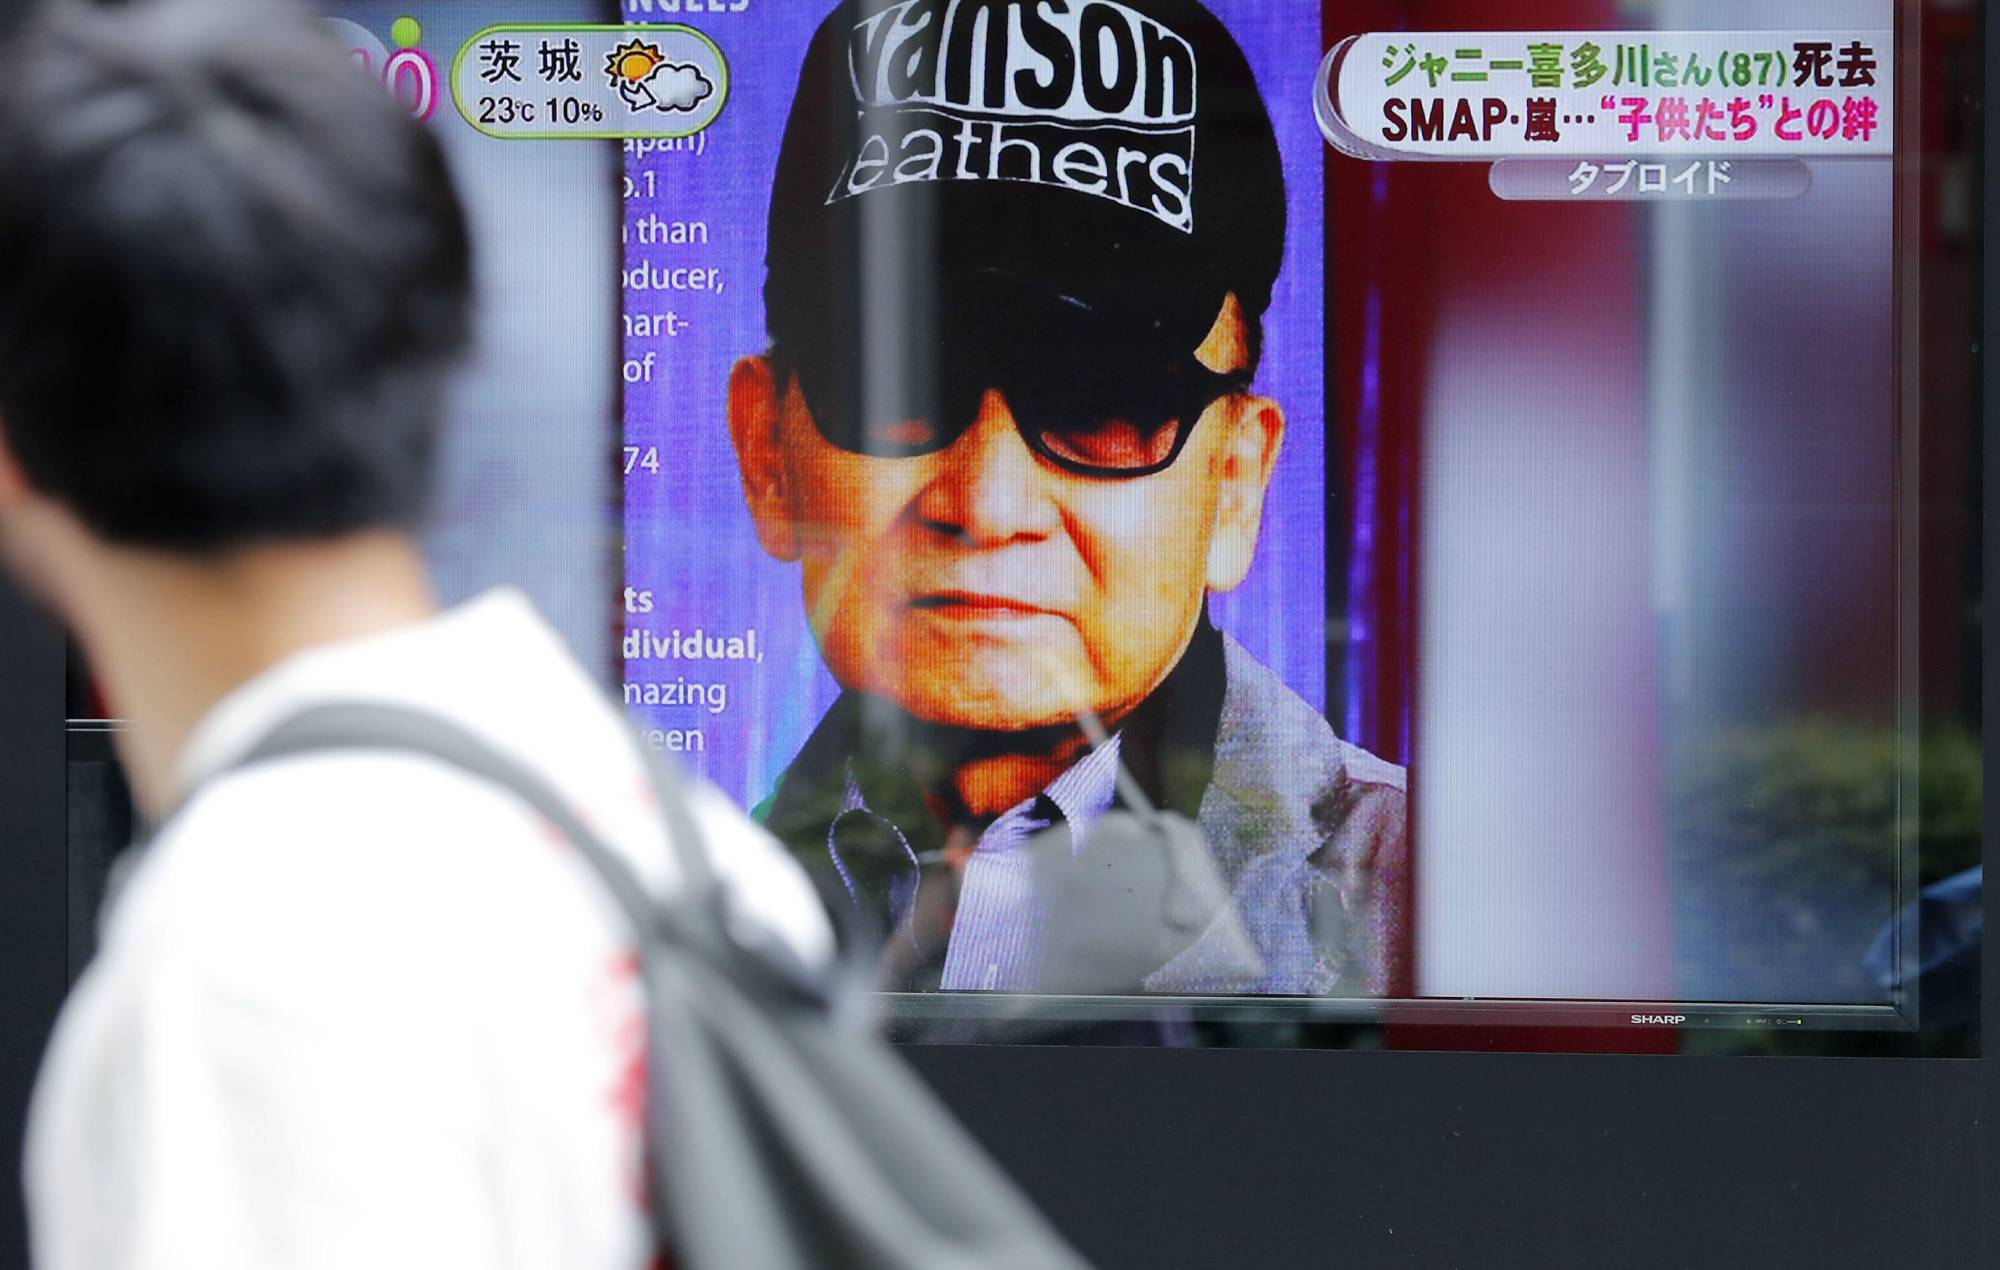 Johnny Kitagawa: J-pop founder who faced decades of sexual abuse allegations